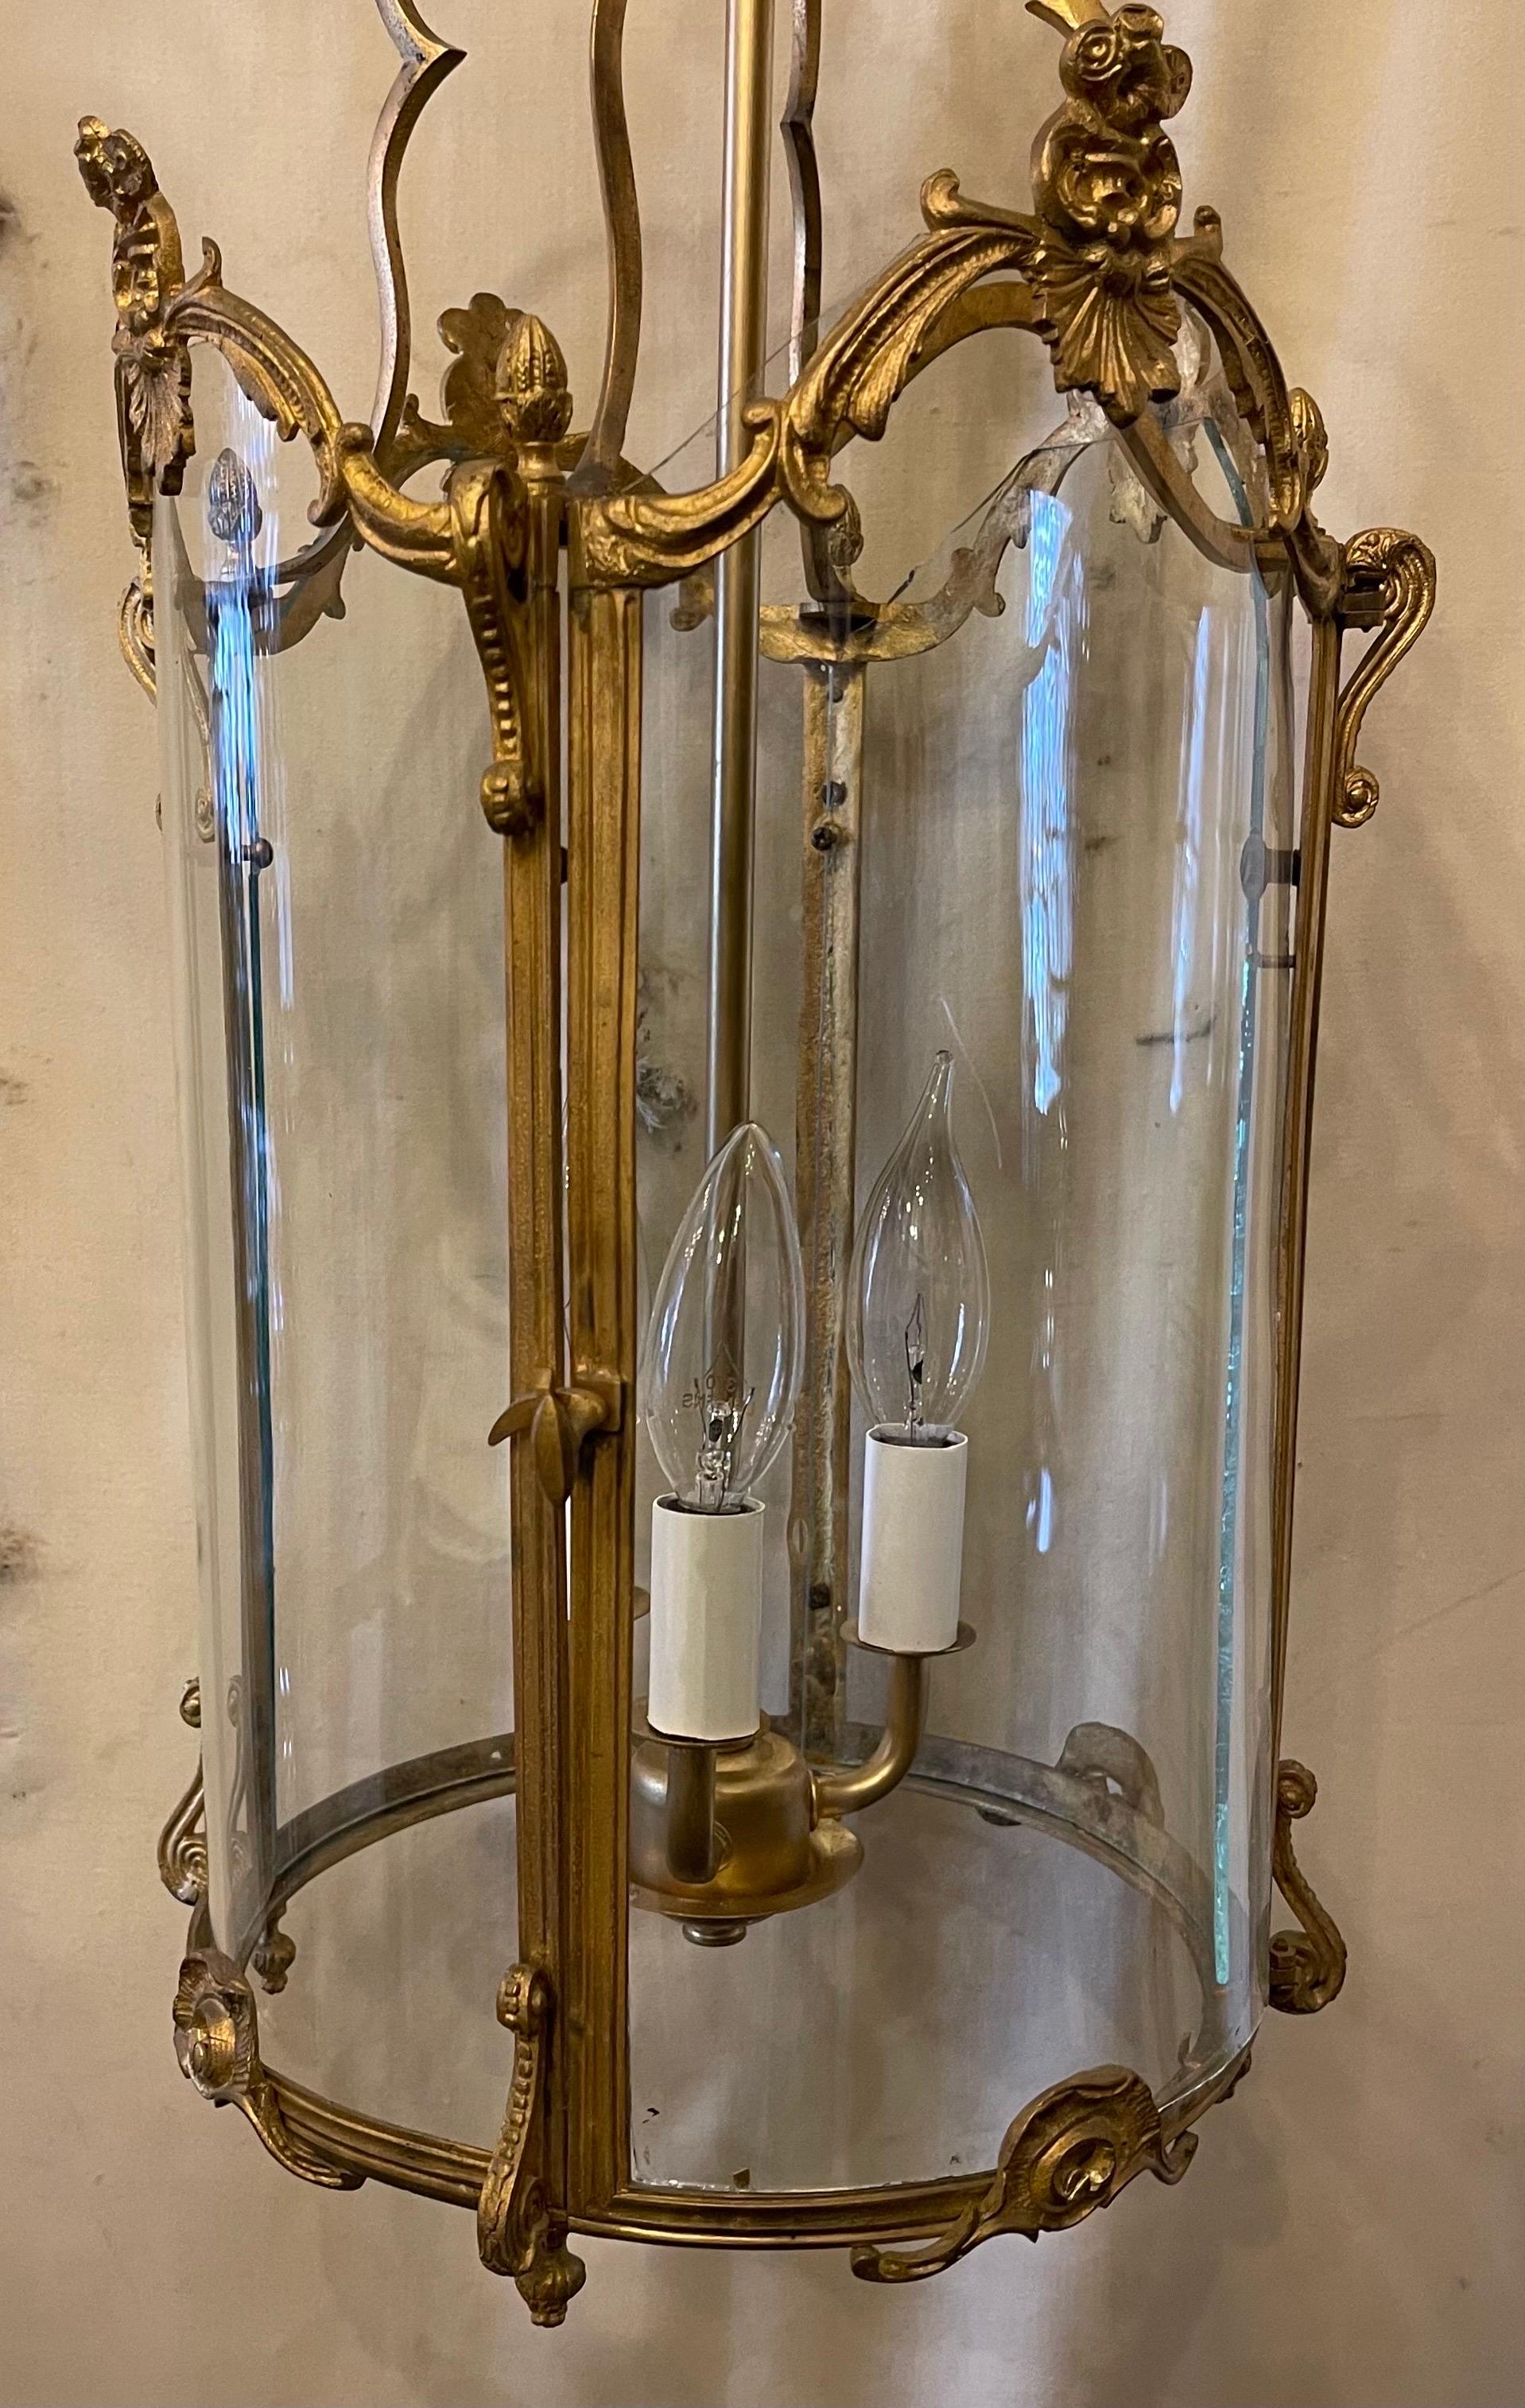 Wonderful French Dore Bronze Rococo Louis XV Petite Lantern Chandelier Fixture In Good Condition For Sale In Roslyn, NY